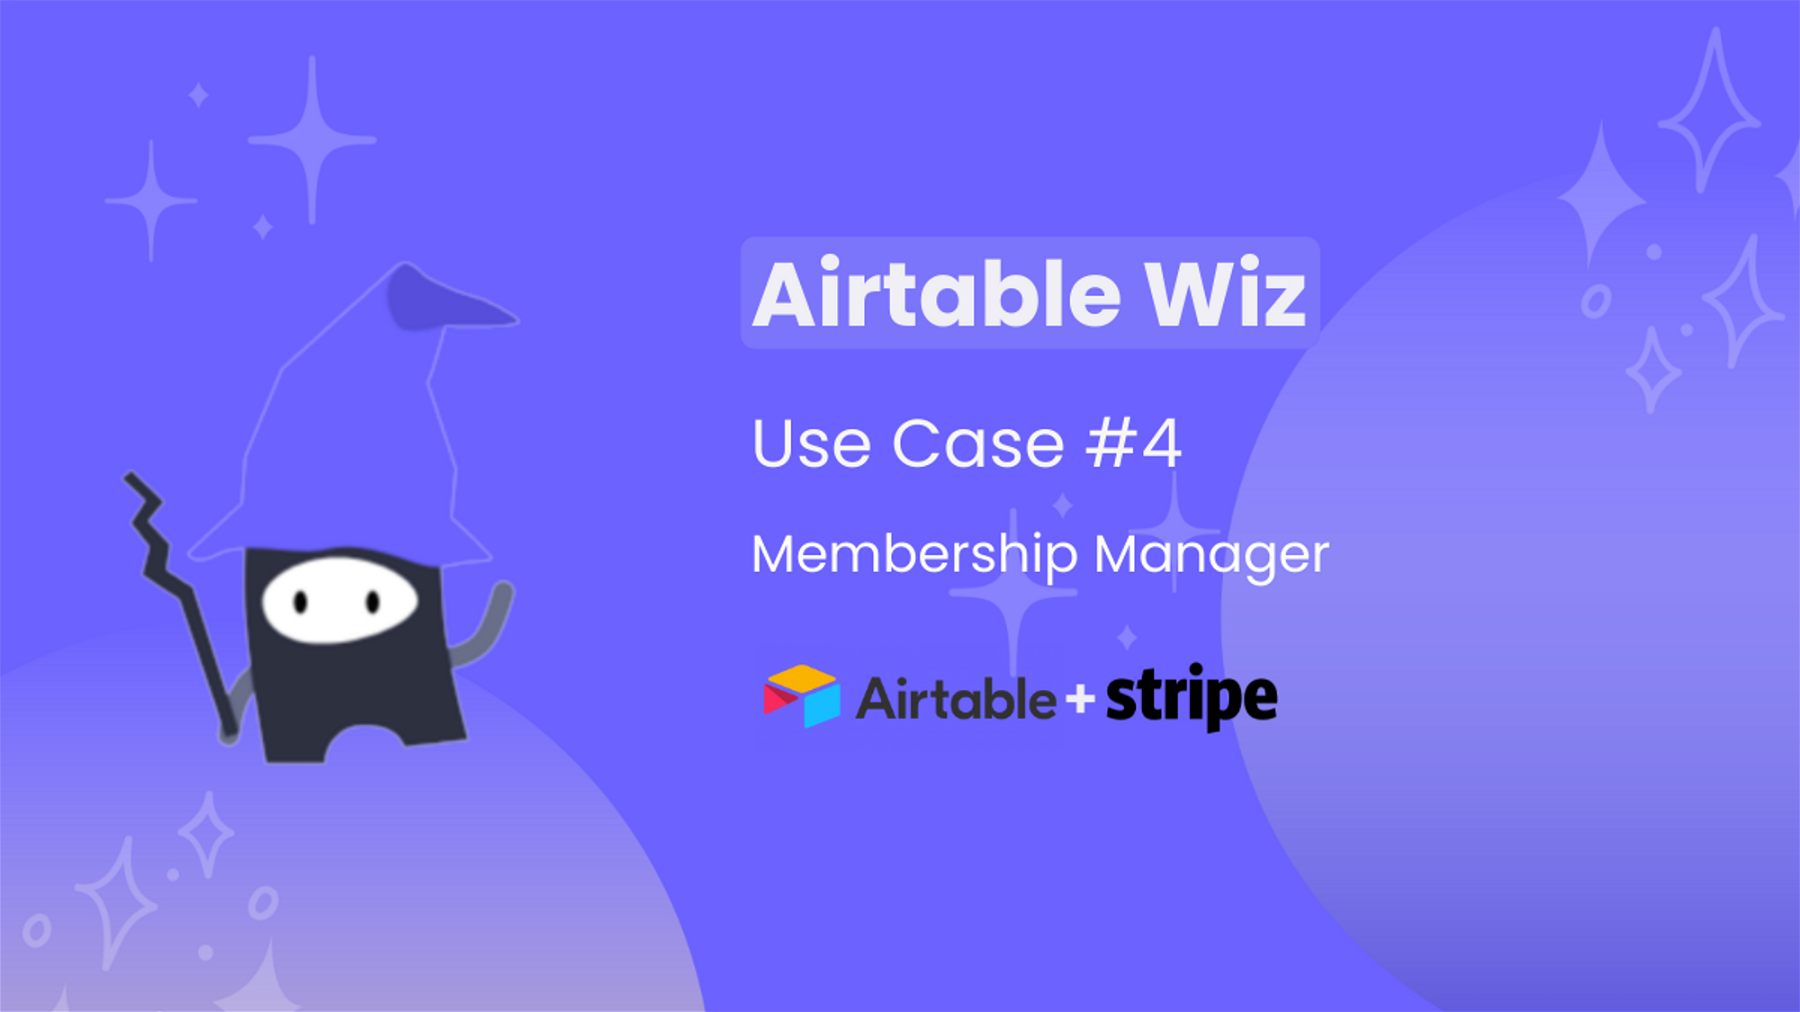 Use Case #4: Membership Manager